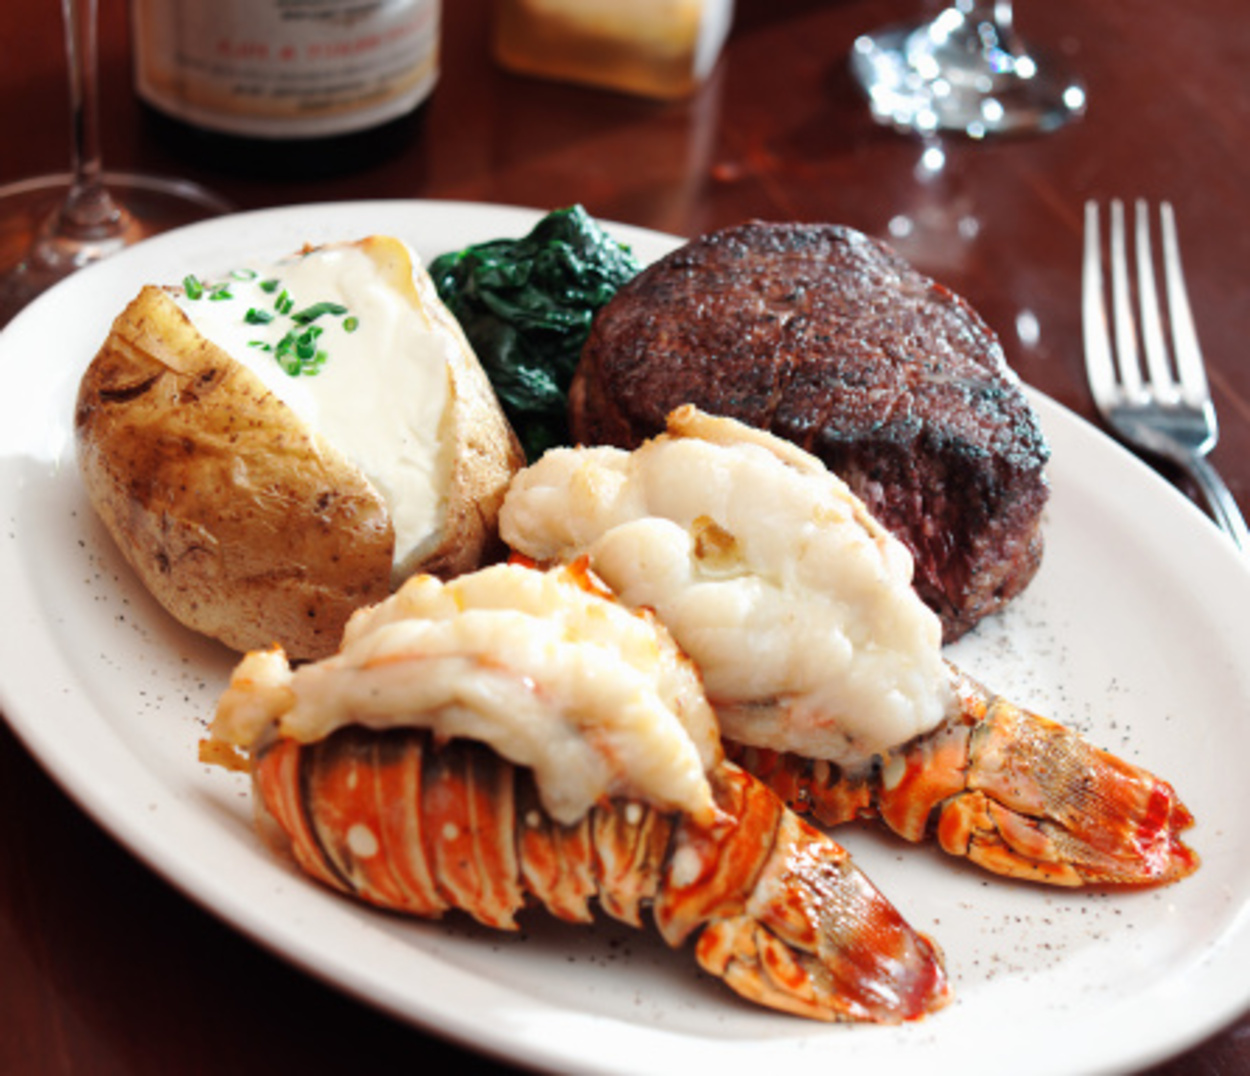 Lobster tails with baked potato and spinach.